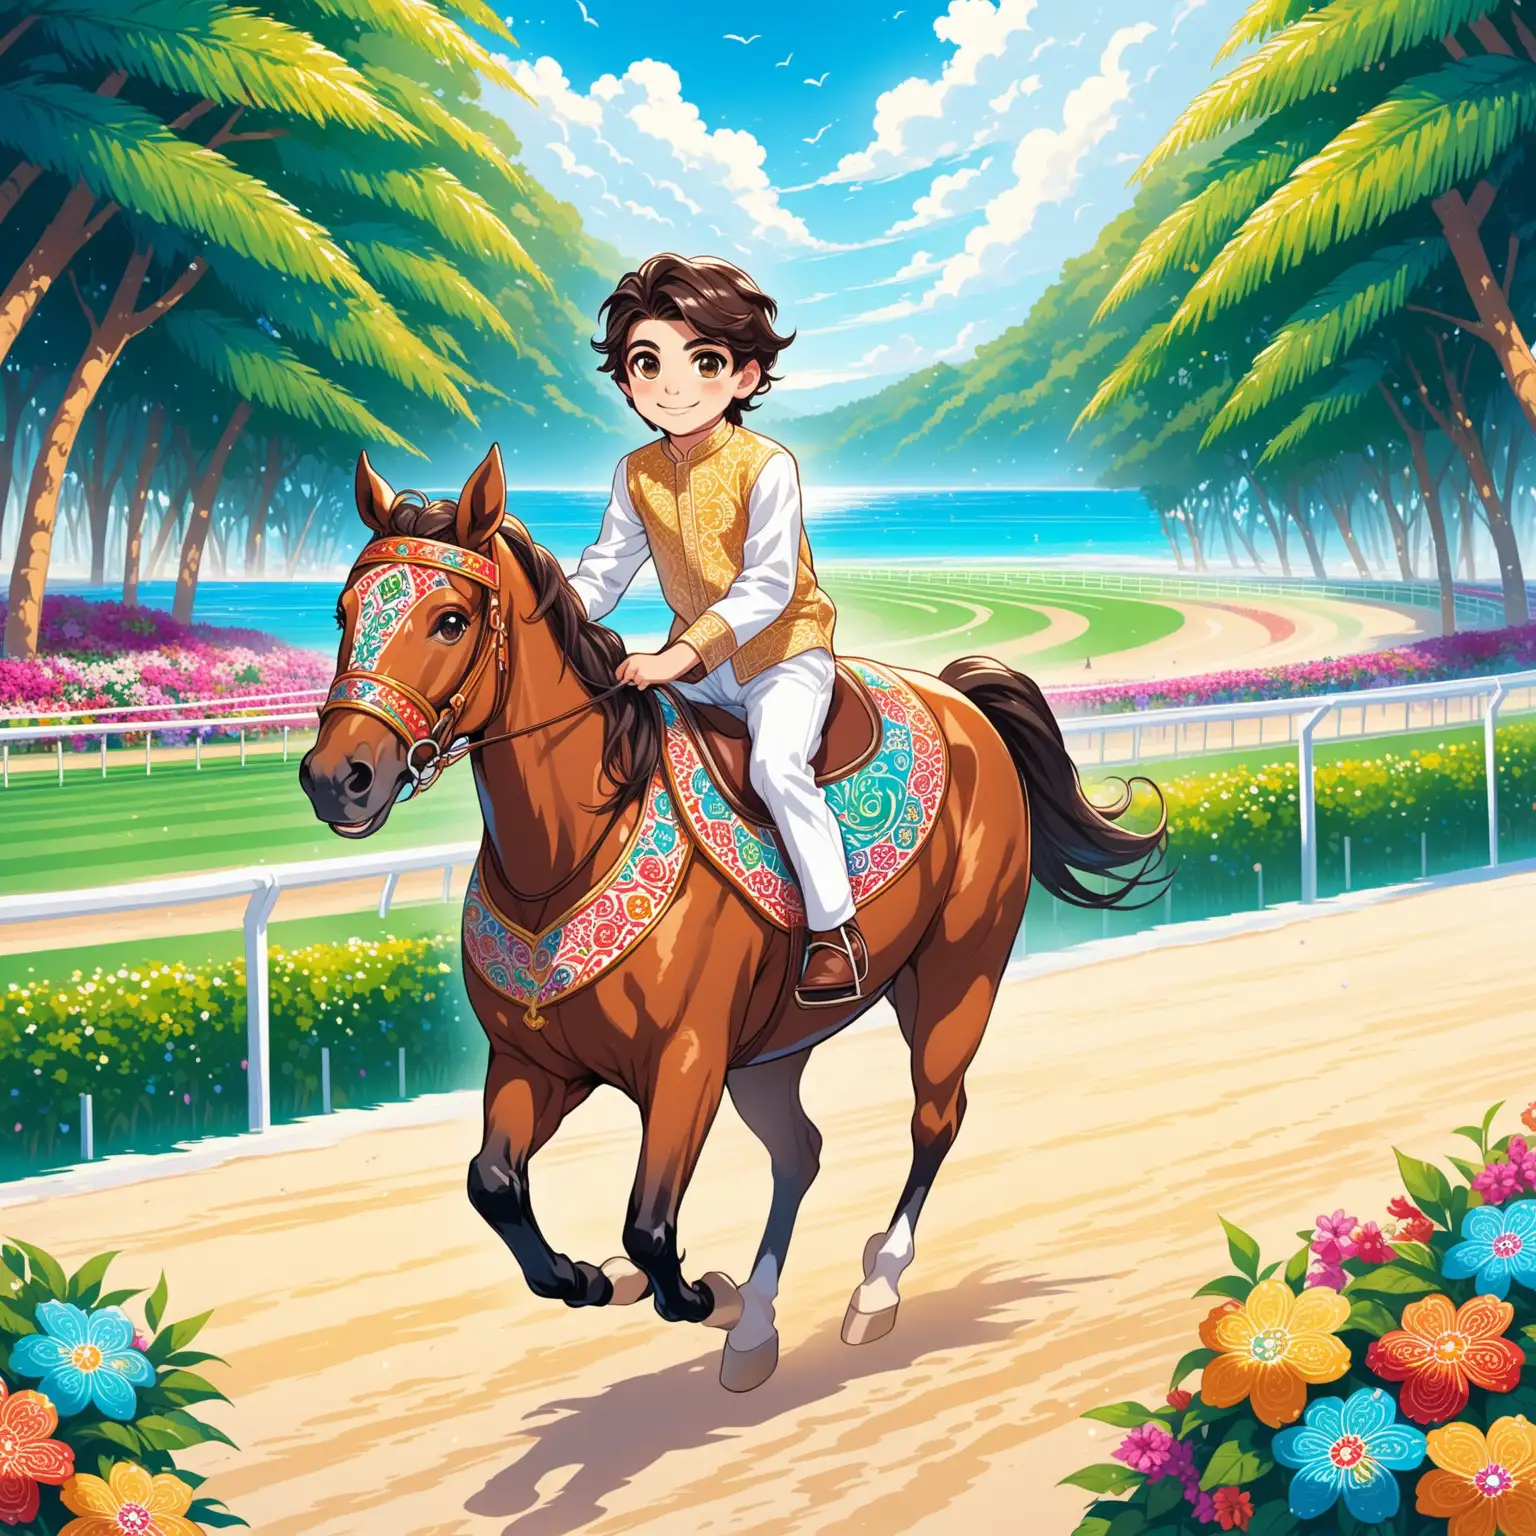 Character Persian 9 years old boy(riding horse, smaller eyes, bigger nose, white skin, cute, smiling, clothes full of Persian designs, heavenly boy).

Atmosphere super high-tech and modern horse racing field at a fantastic beach, flowers, forest.